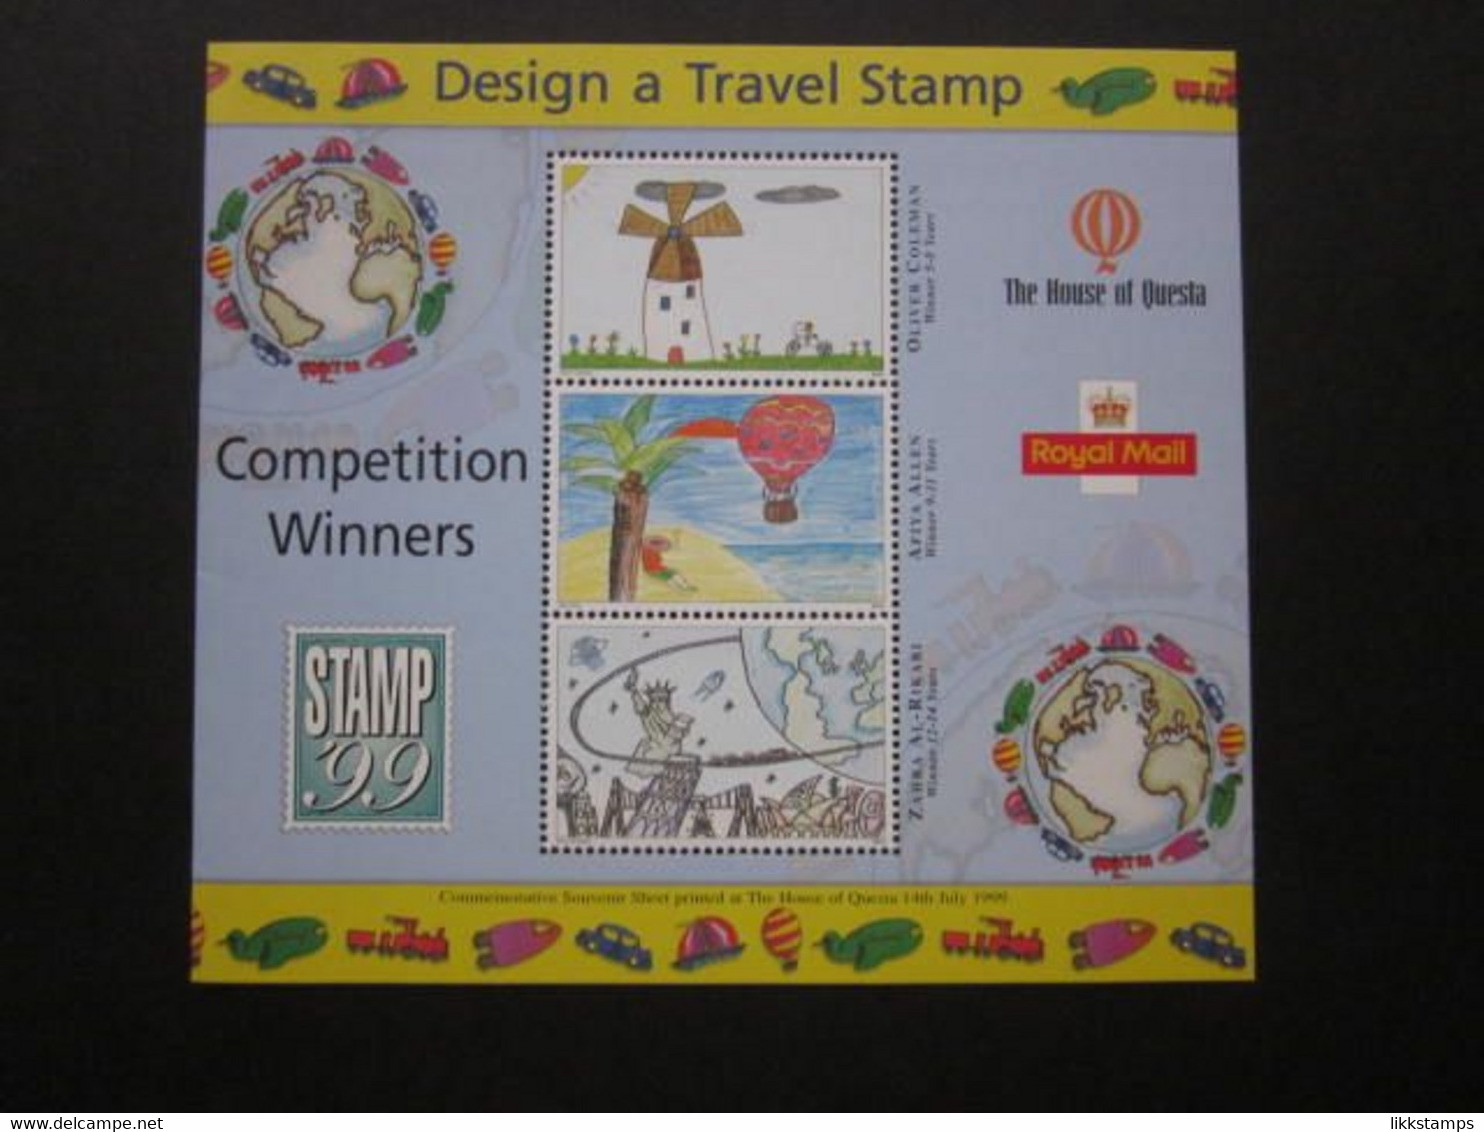 1999 THE ROYAL MAIL/THE HOUSE OF QUESTA DESIGN A TRAVEL STAMP COMPETITION SOUVENIR SHEET. ( 02095 ) - Cinderellas